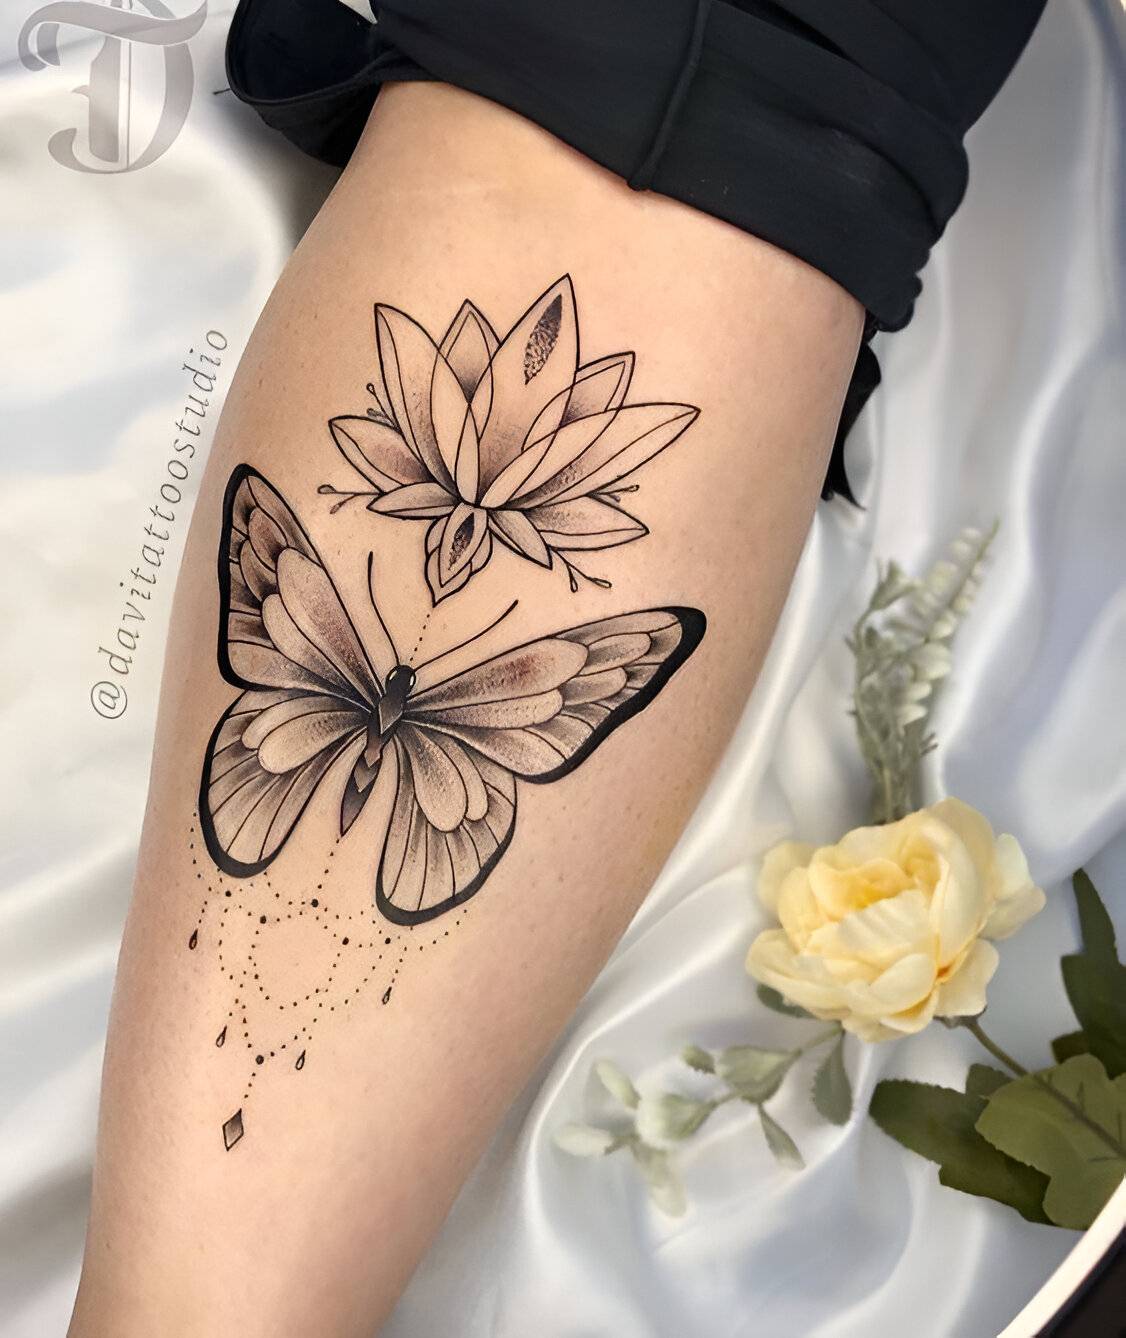 Intricate Arm Butterfly Tattoos